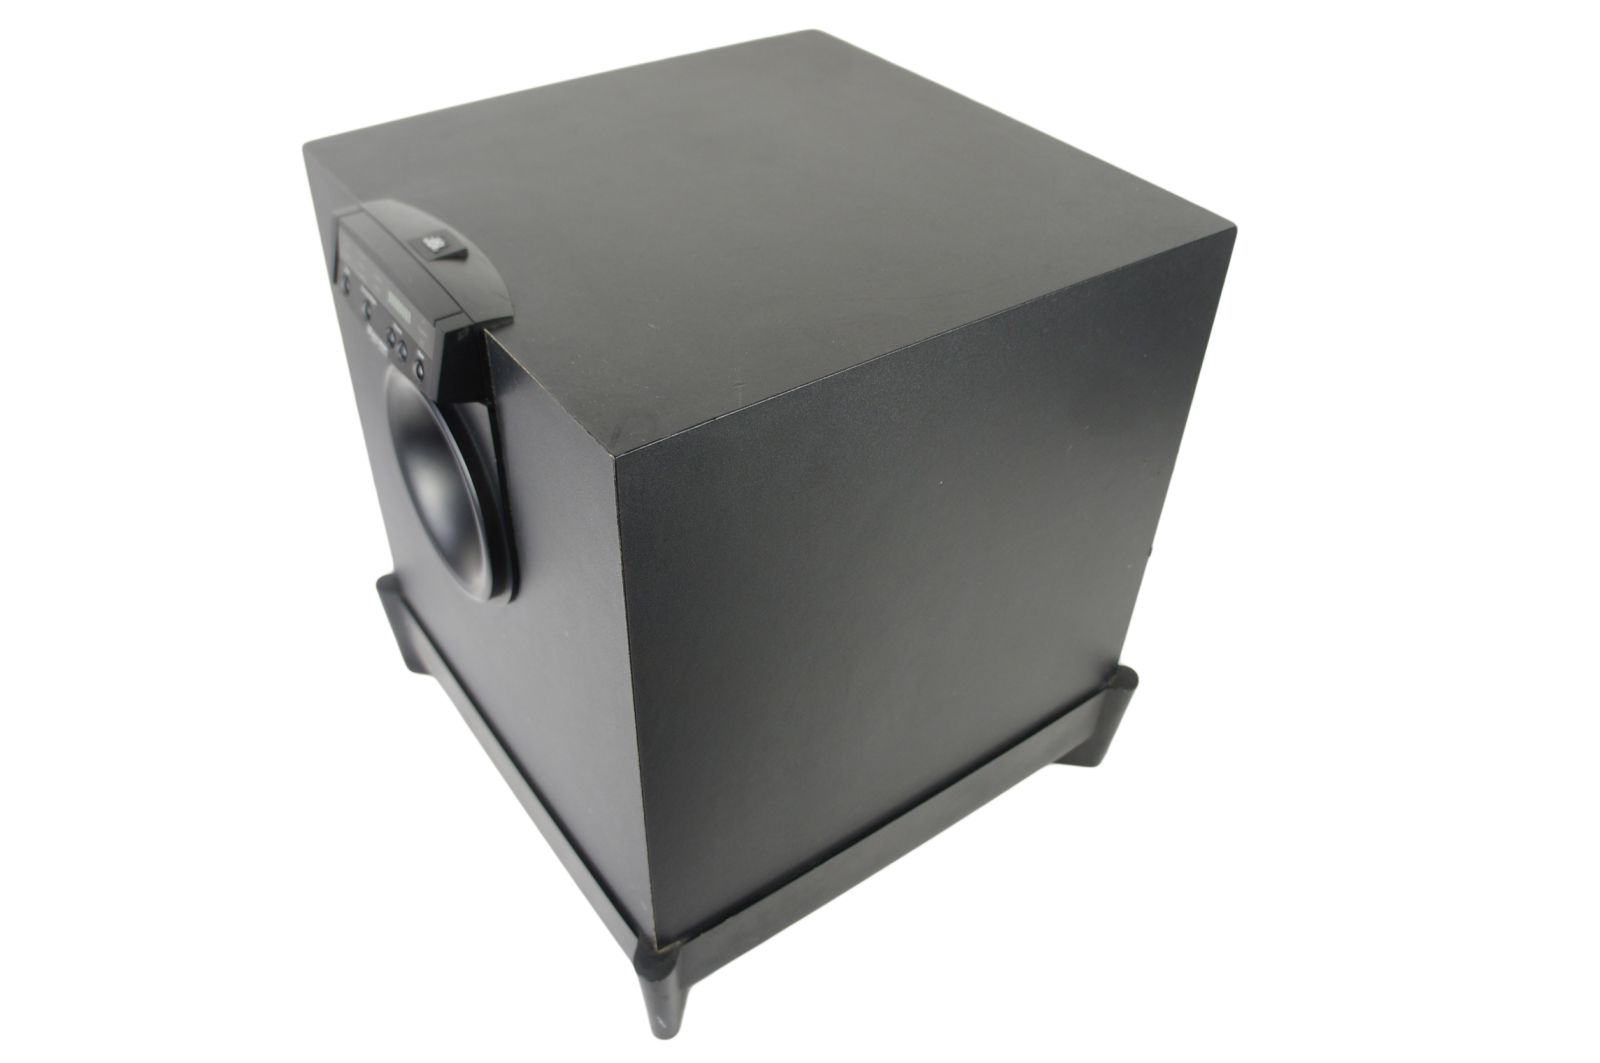 JBL_Simply_Cinema_SUB300_Home_Theater_Subwoofer_06